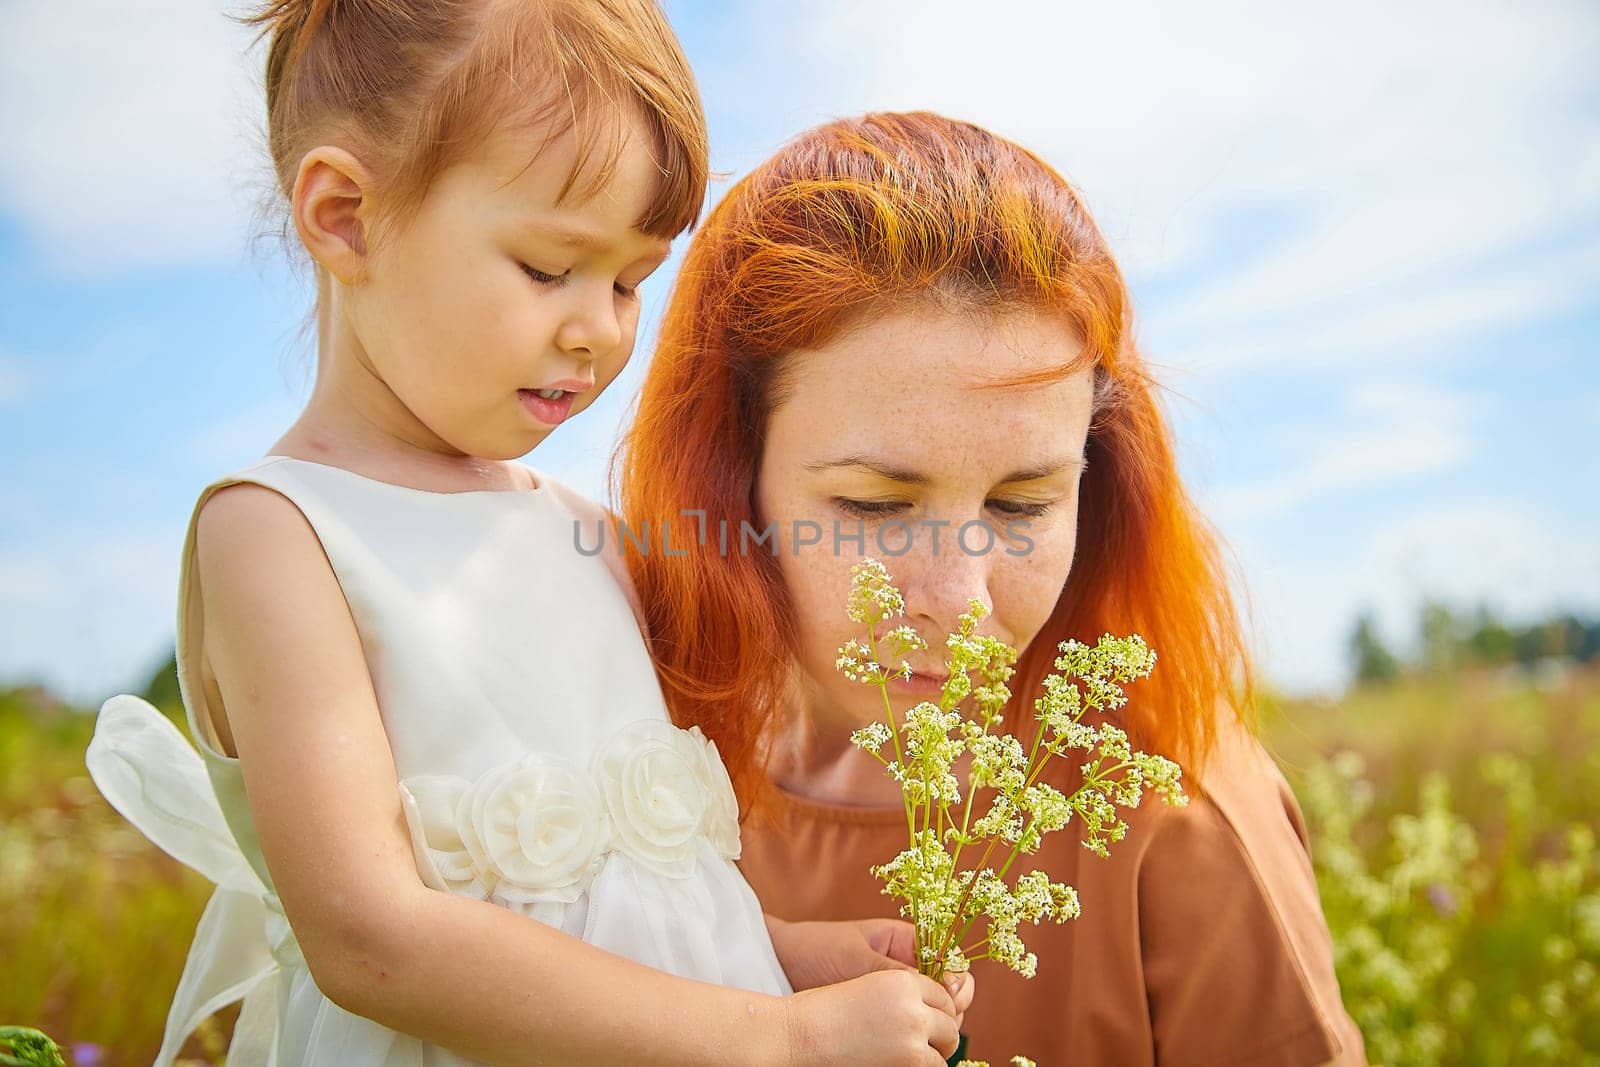 Happy female family with mother and daughter on green and yellow meadow full of grass and flower. Woman with red hair and blonde girl having fun, joy and hug in sunny summer day. Concept family love